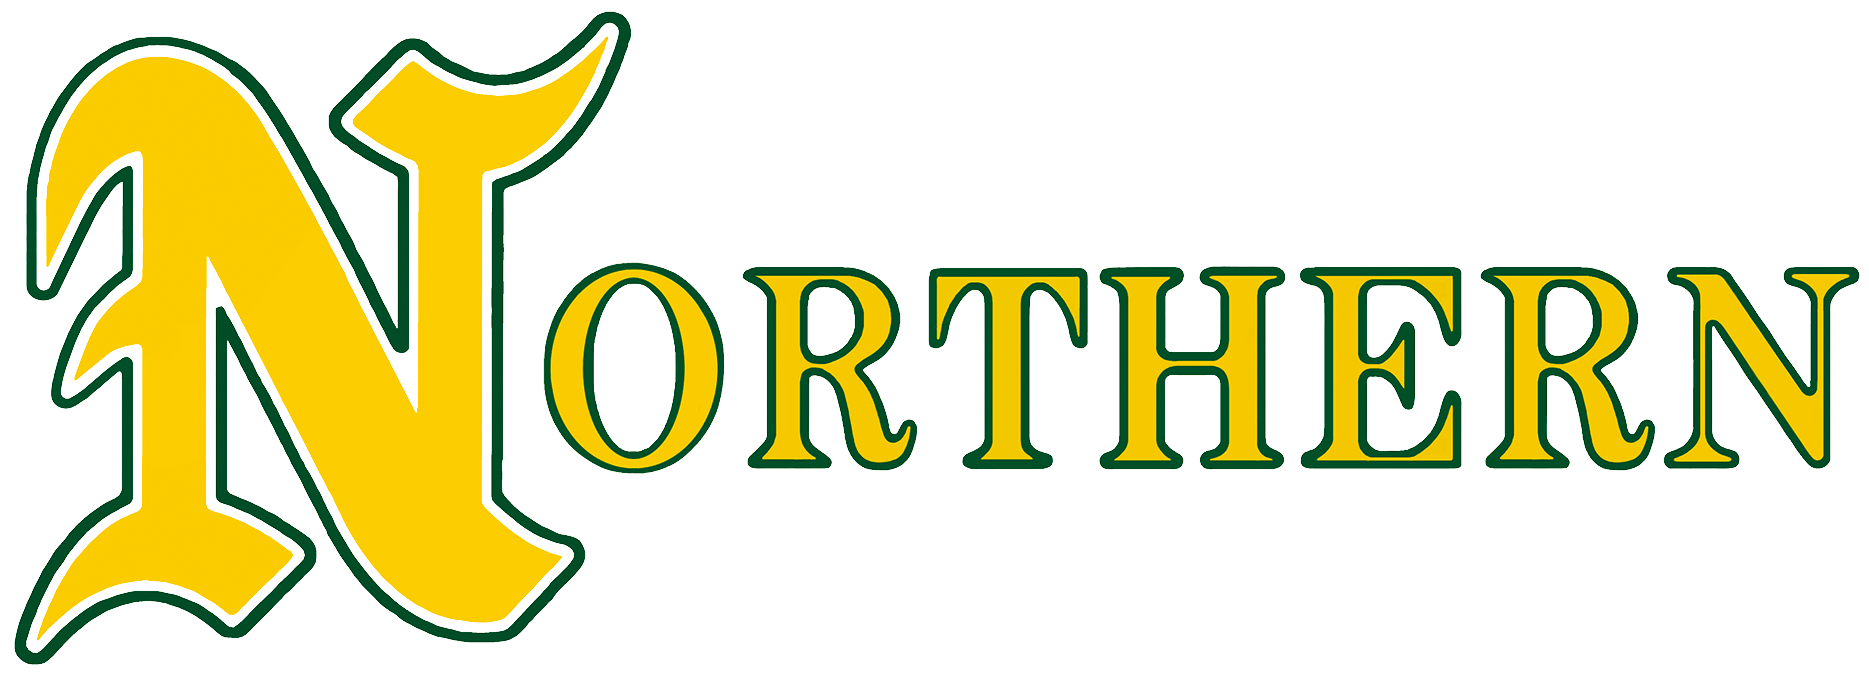 Northern Tree Service Residential and Commercial Tree Removal and Tree Management